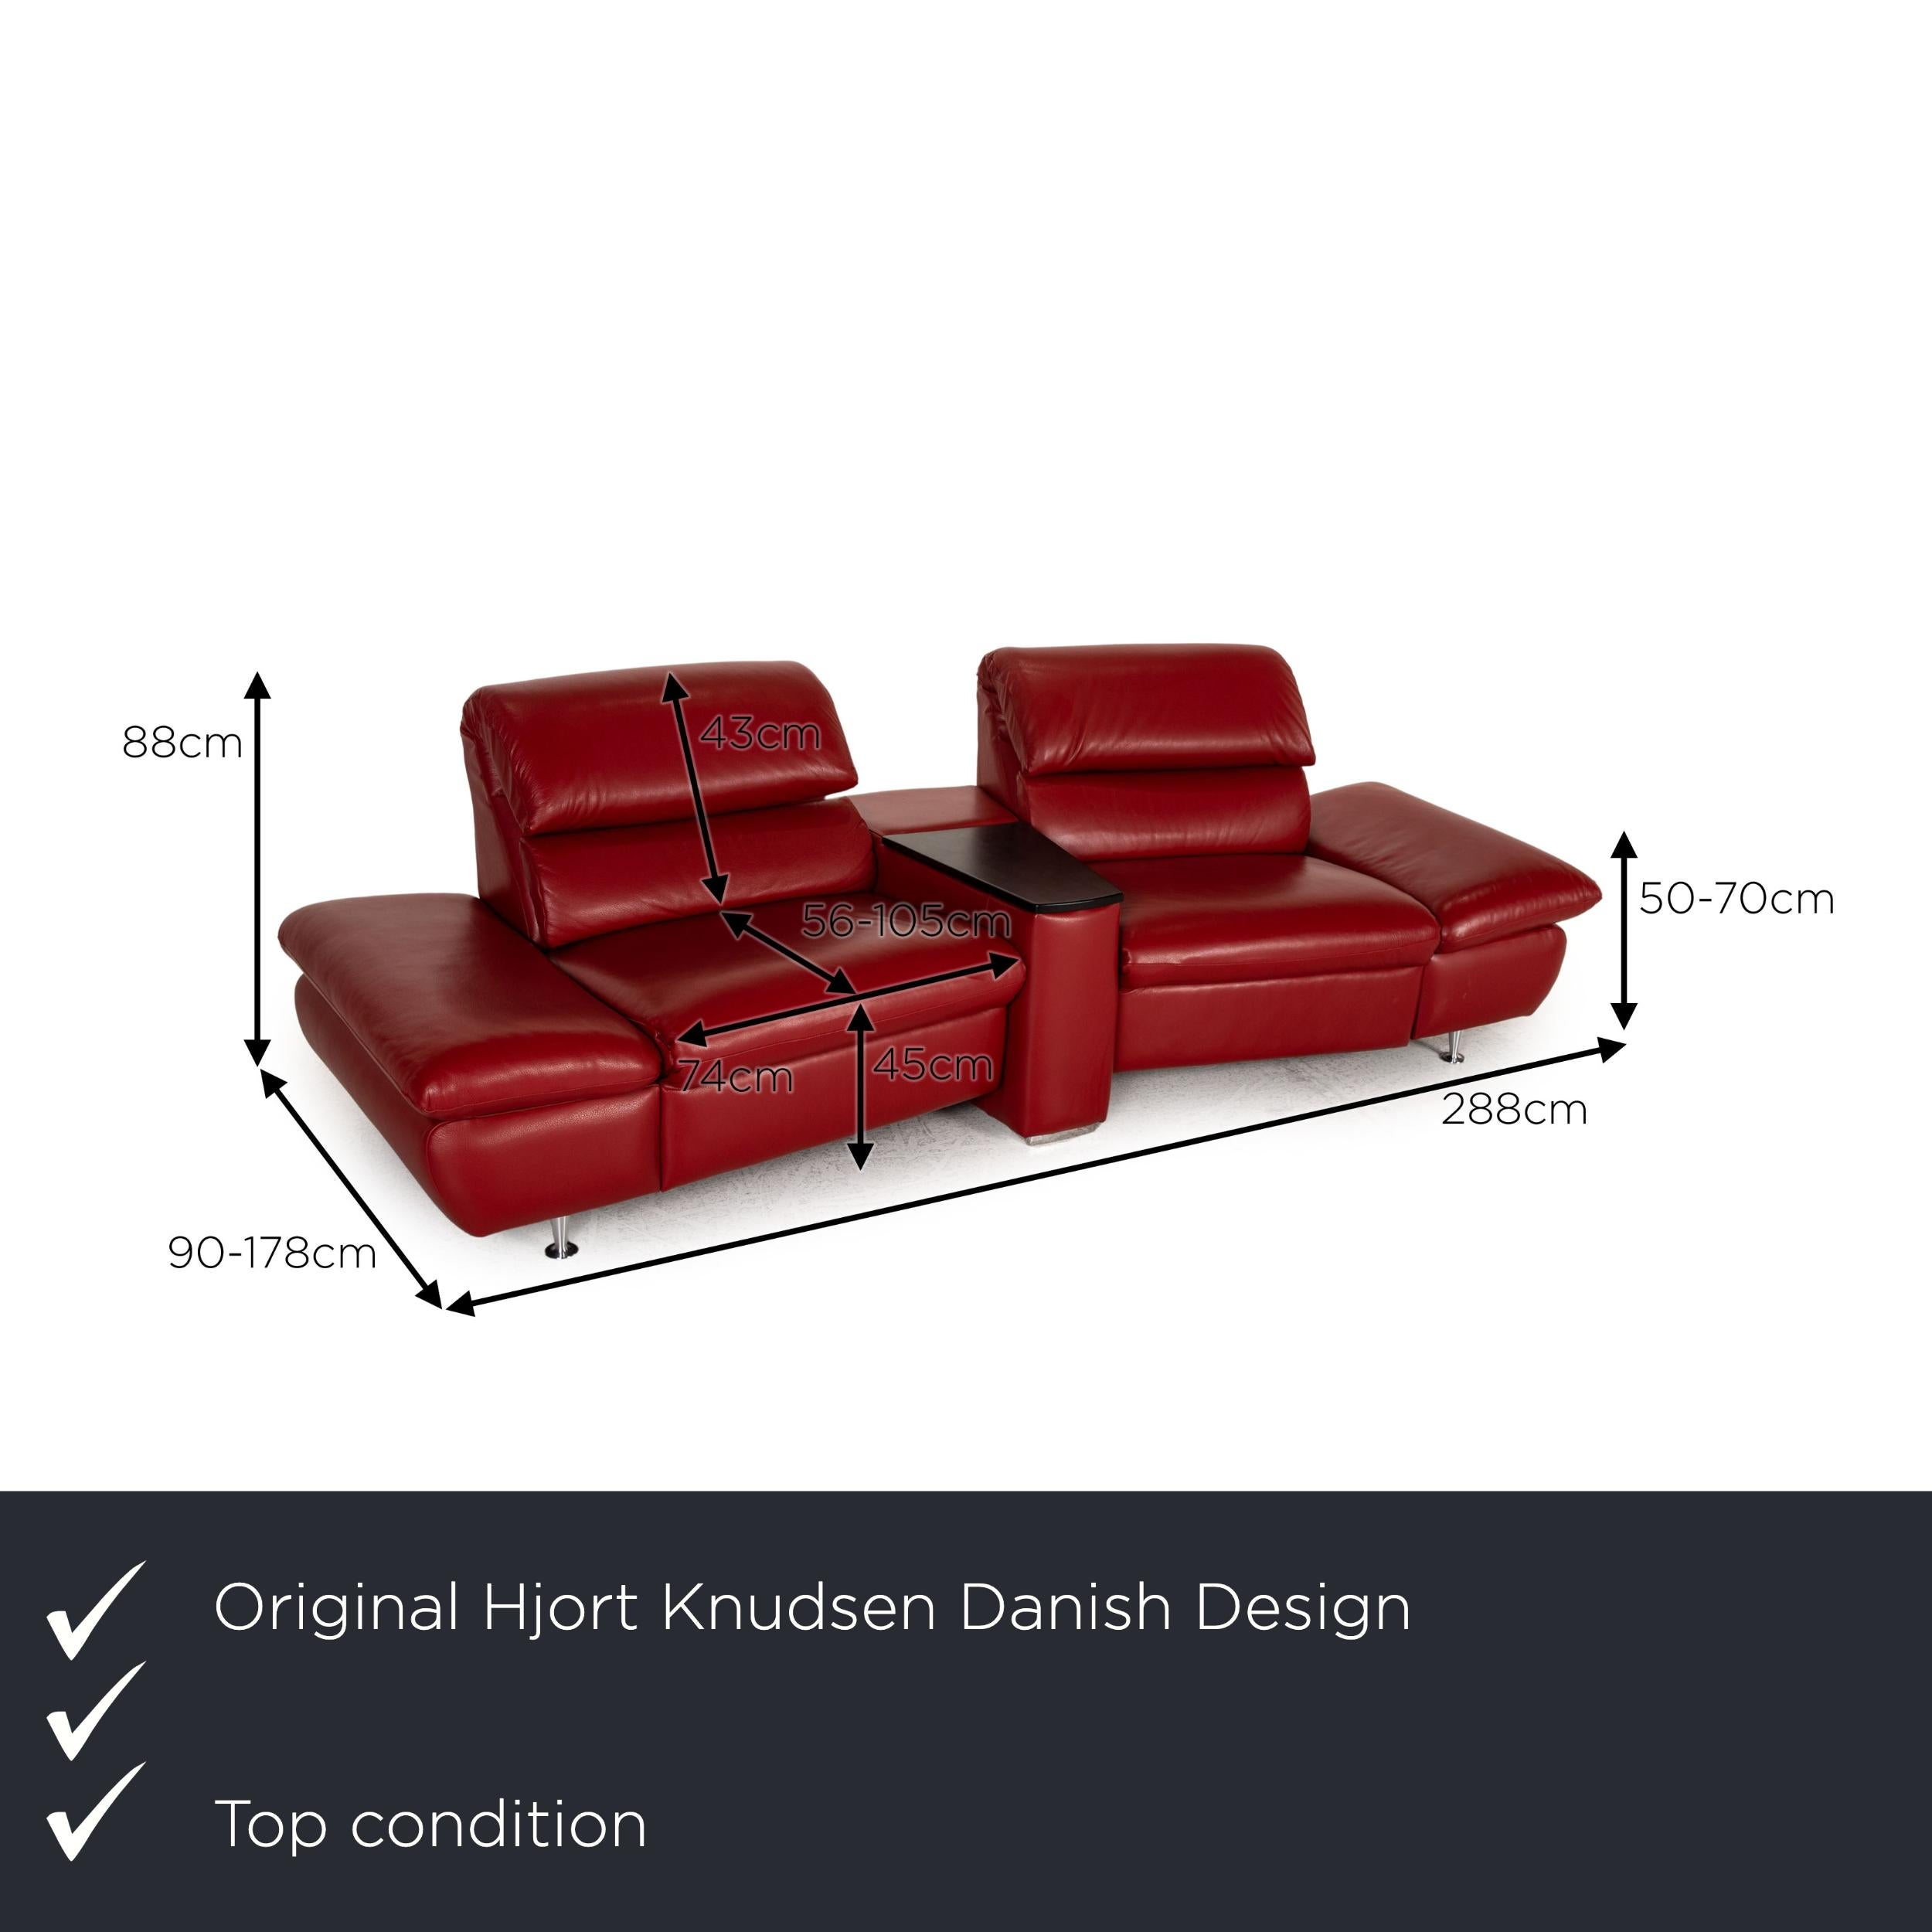 We present to you a Hjort Knudsen Danish design Barbardos leather sofa red two-seater couch.

Product measurements in centimeters:

depth: 90
width: 288
height: 88
seat height: 45
rest height: 50
seat depth: 56
seat width: 74
back height: